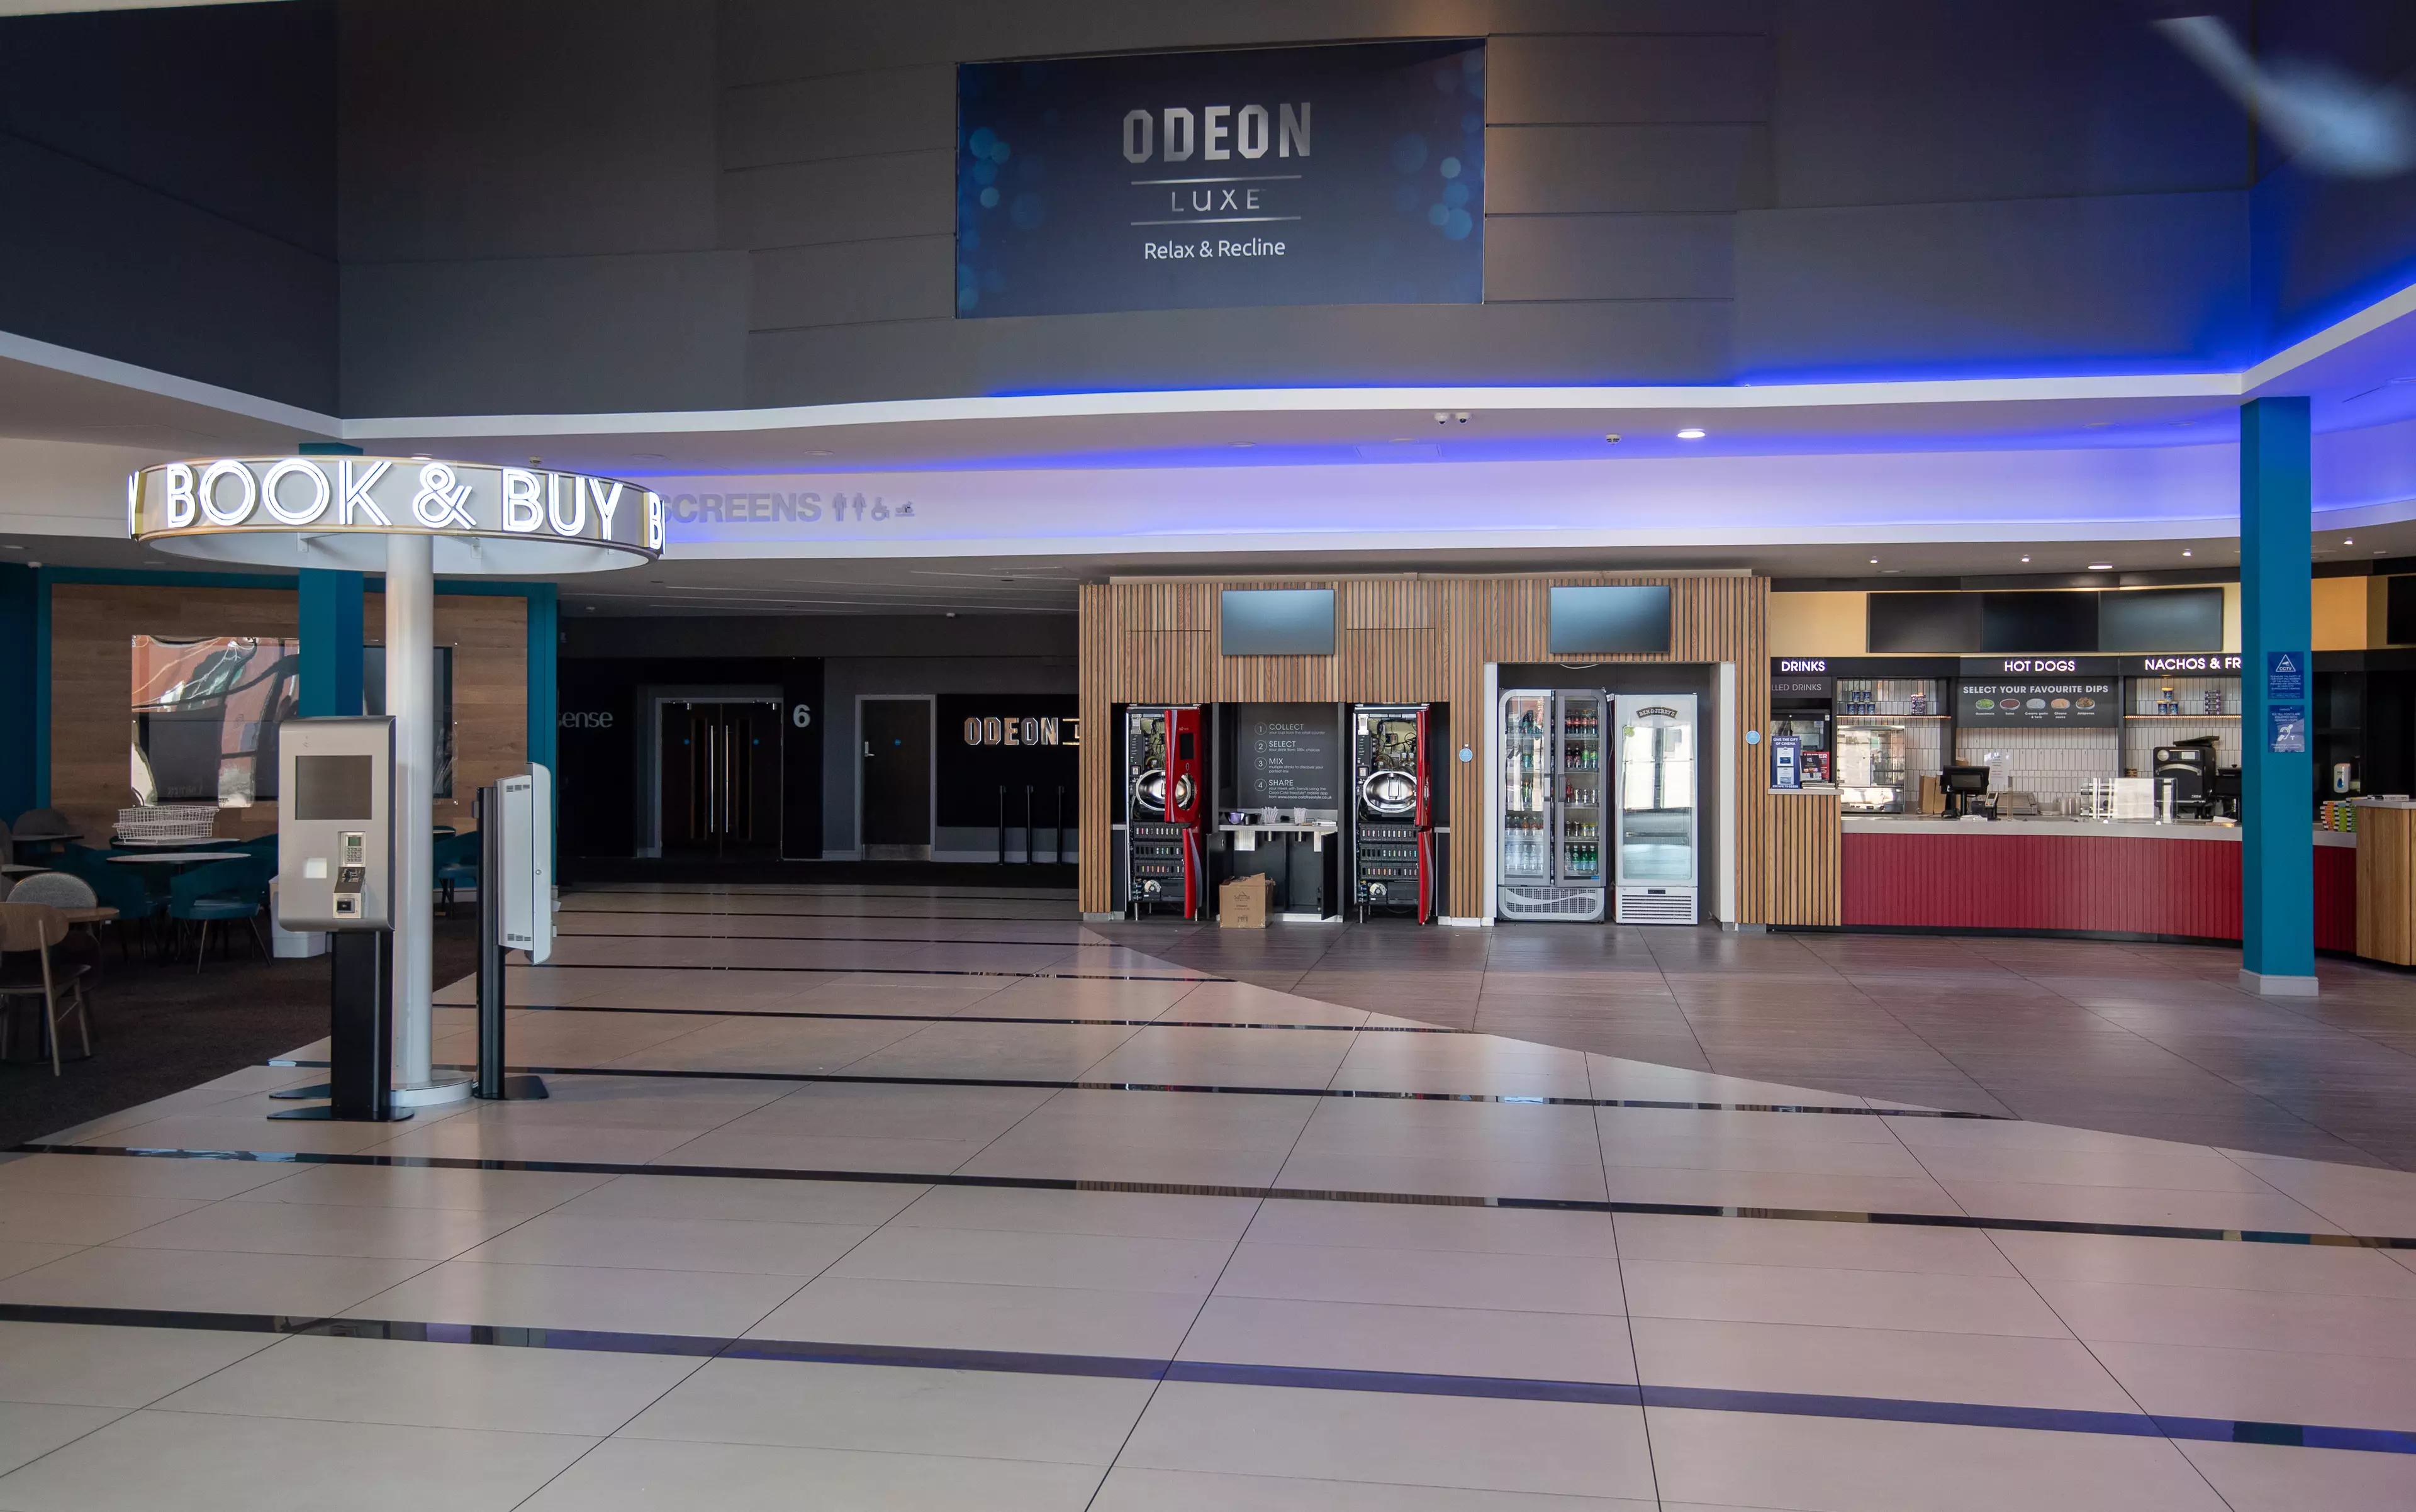 AMC Theatres owns Odeon in the UK.